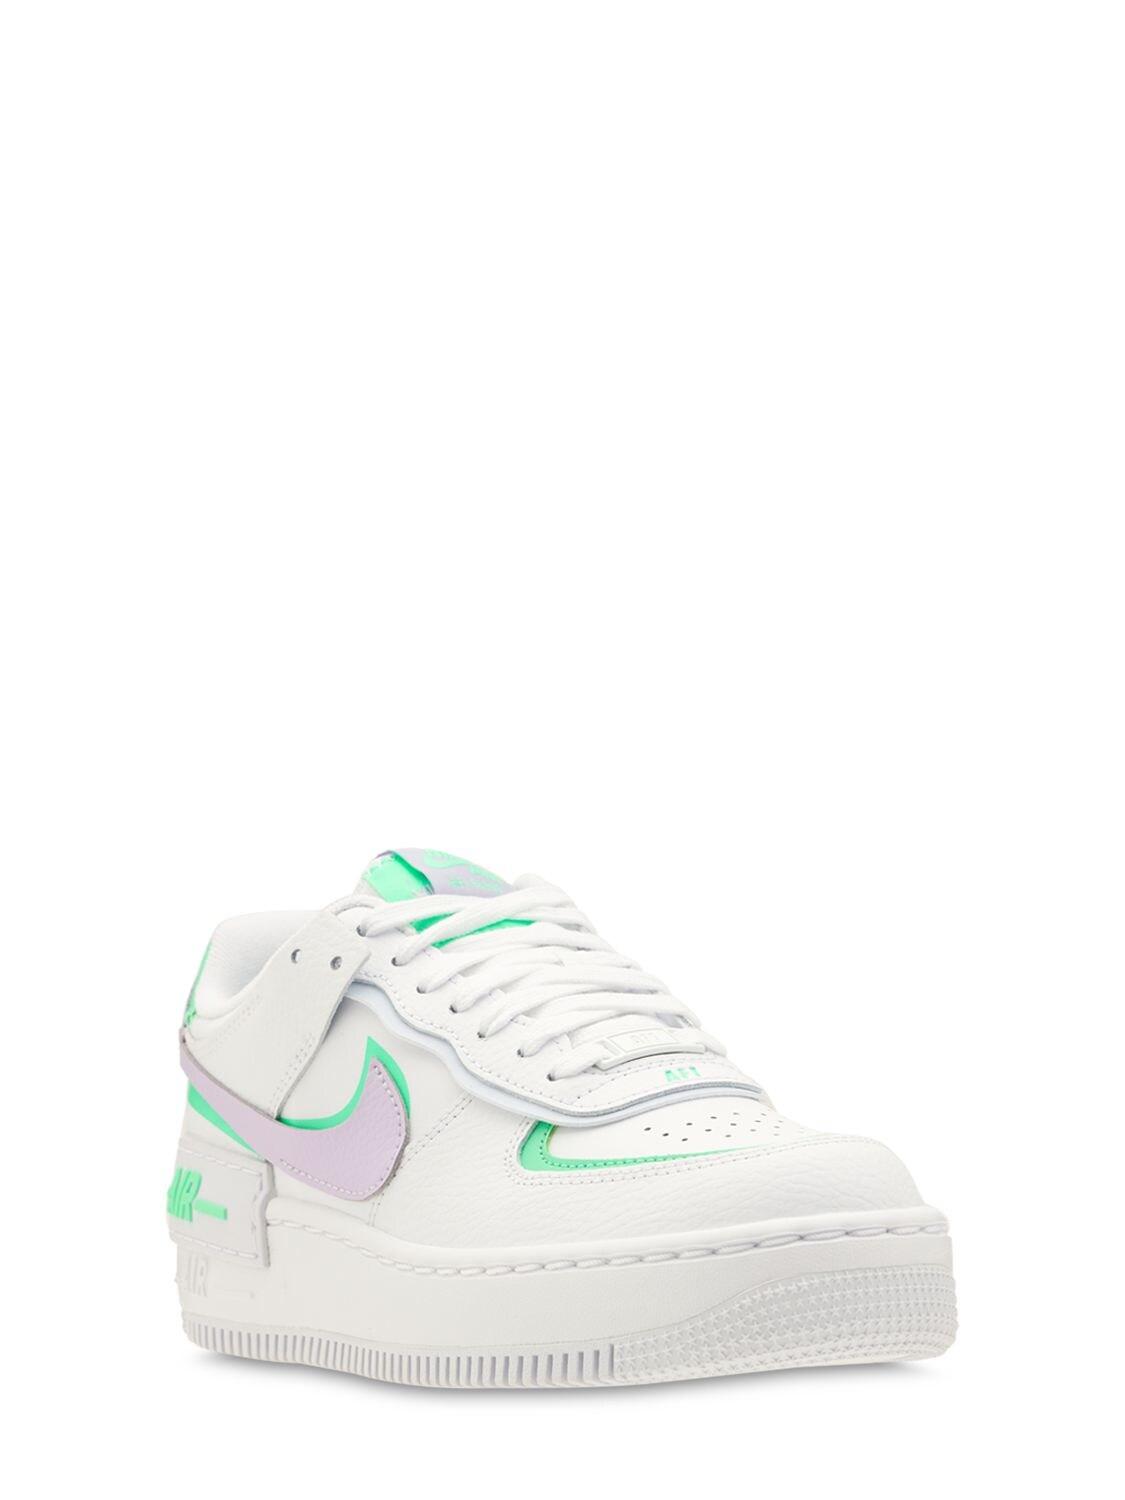 Nike Air Force 1 Shadow Sneakers in White/Lilac (White) - Lyst